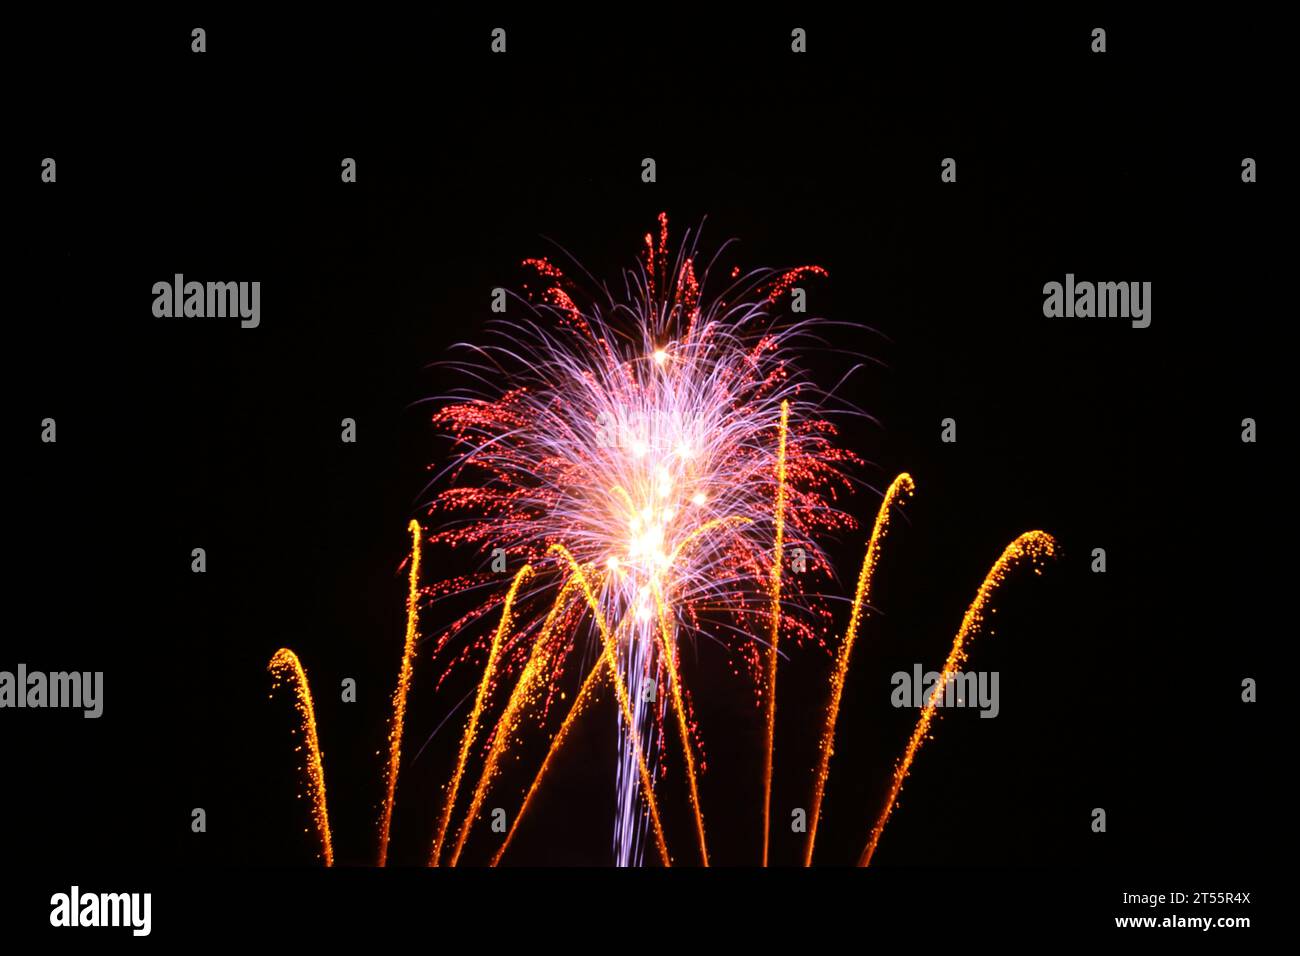 Gold, purple, red fireworks in black night sky with black copy space Stock Photo